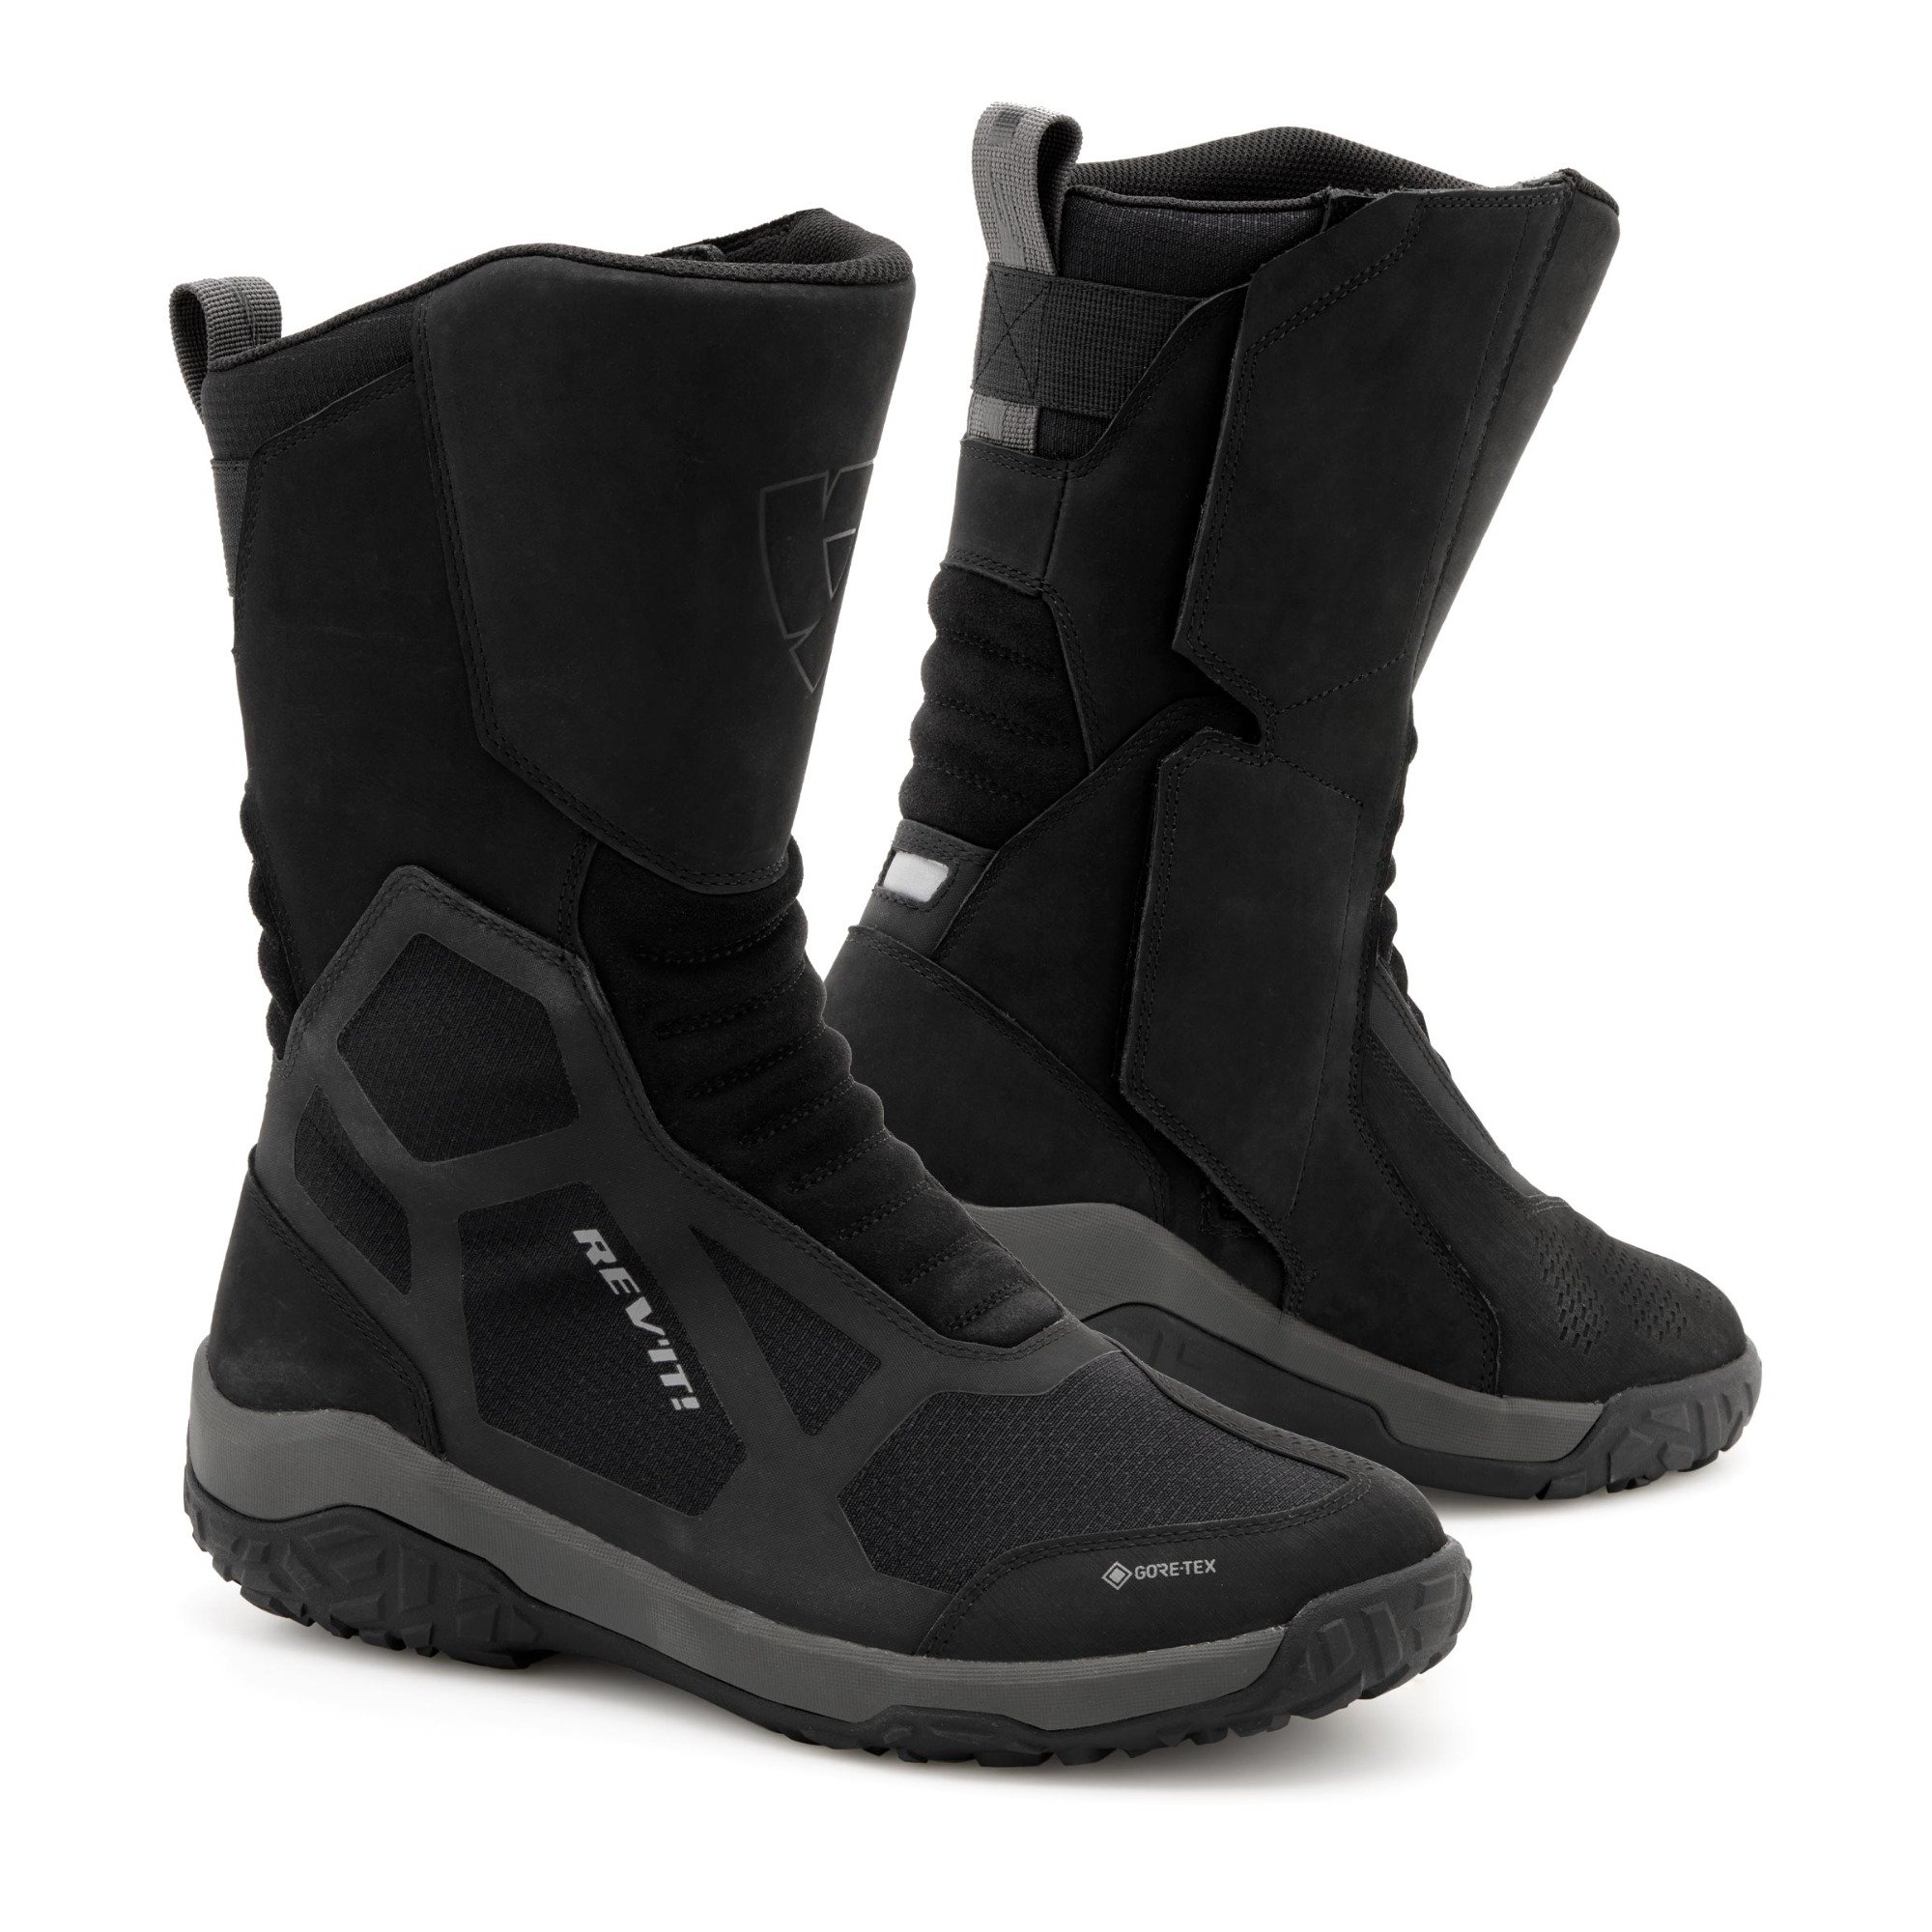 Image of REV'IT! Everest GTX Boots Black Size 40 ID 8700001328517